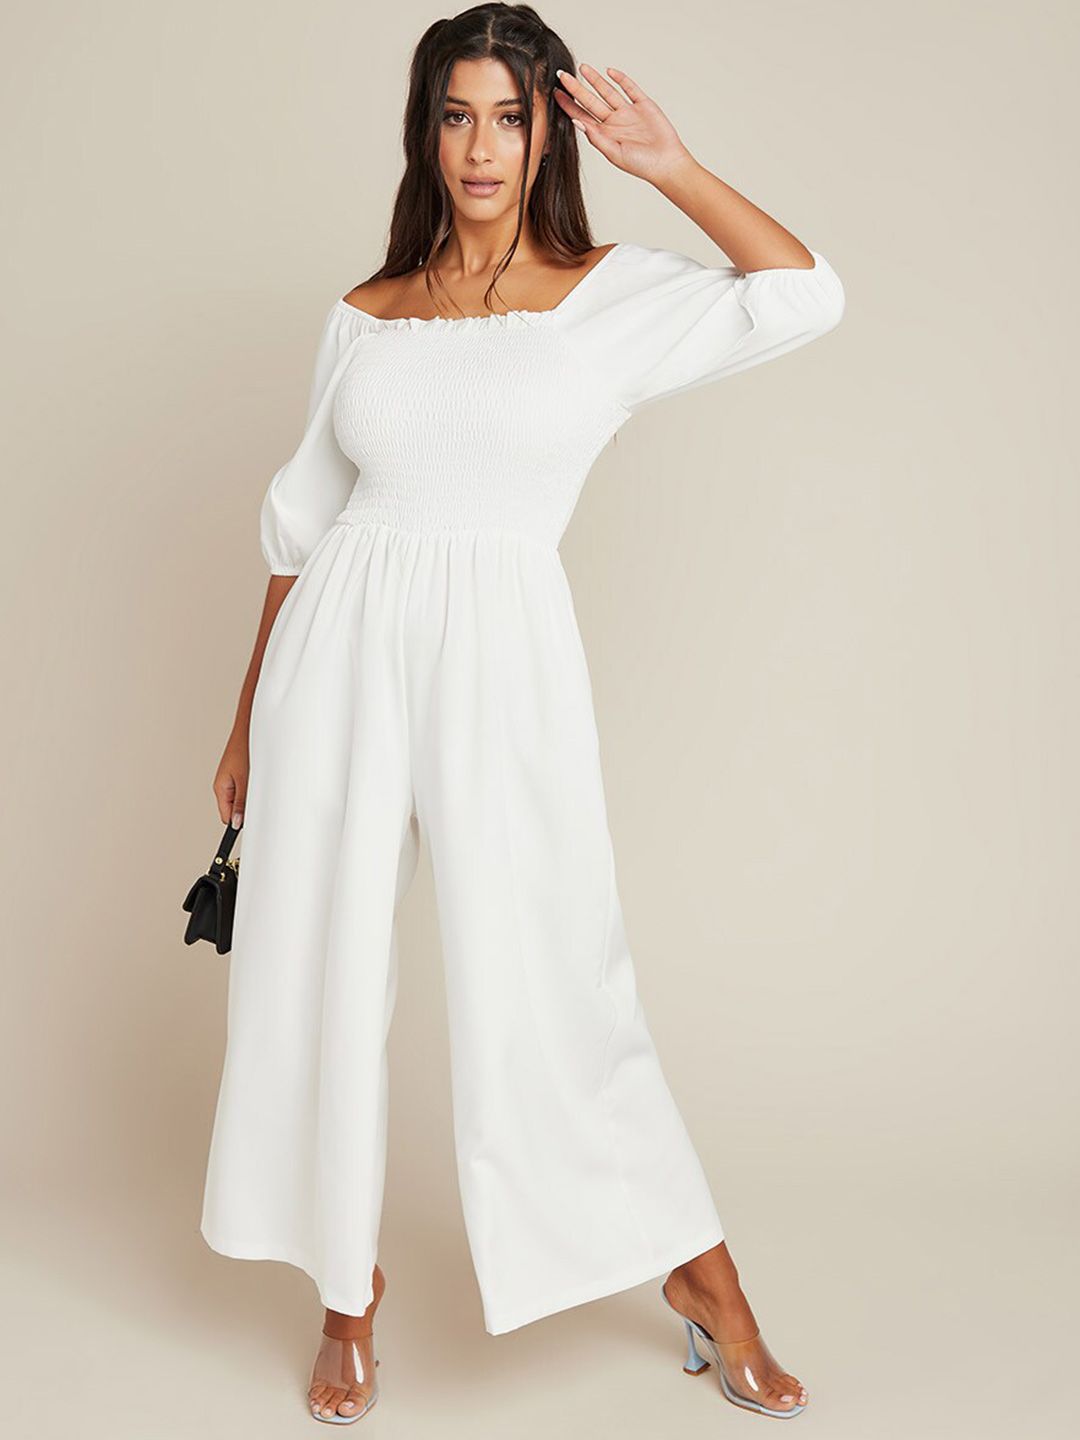 Styli White Off-Shoulder Basic Jumpsuit Price in India